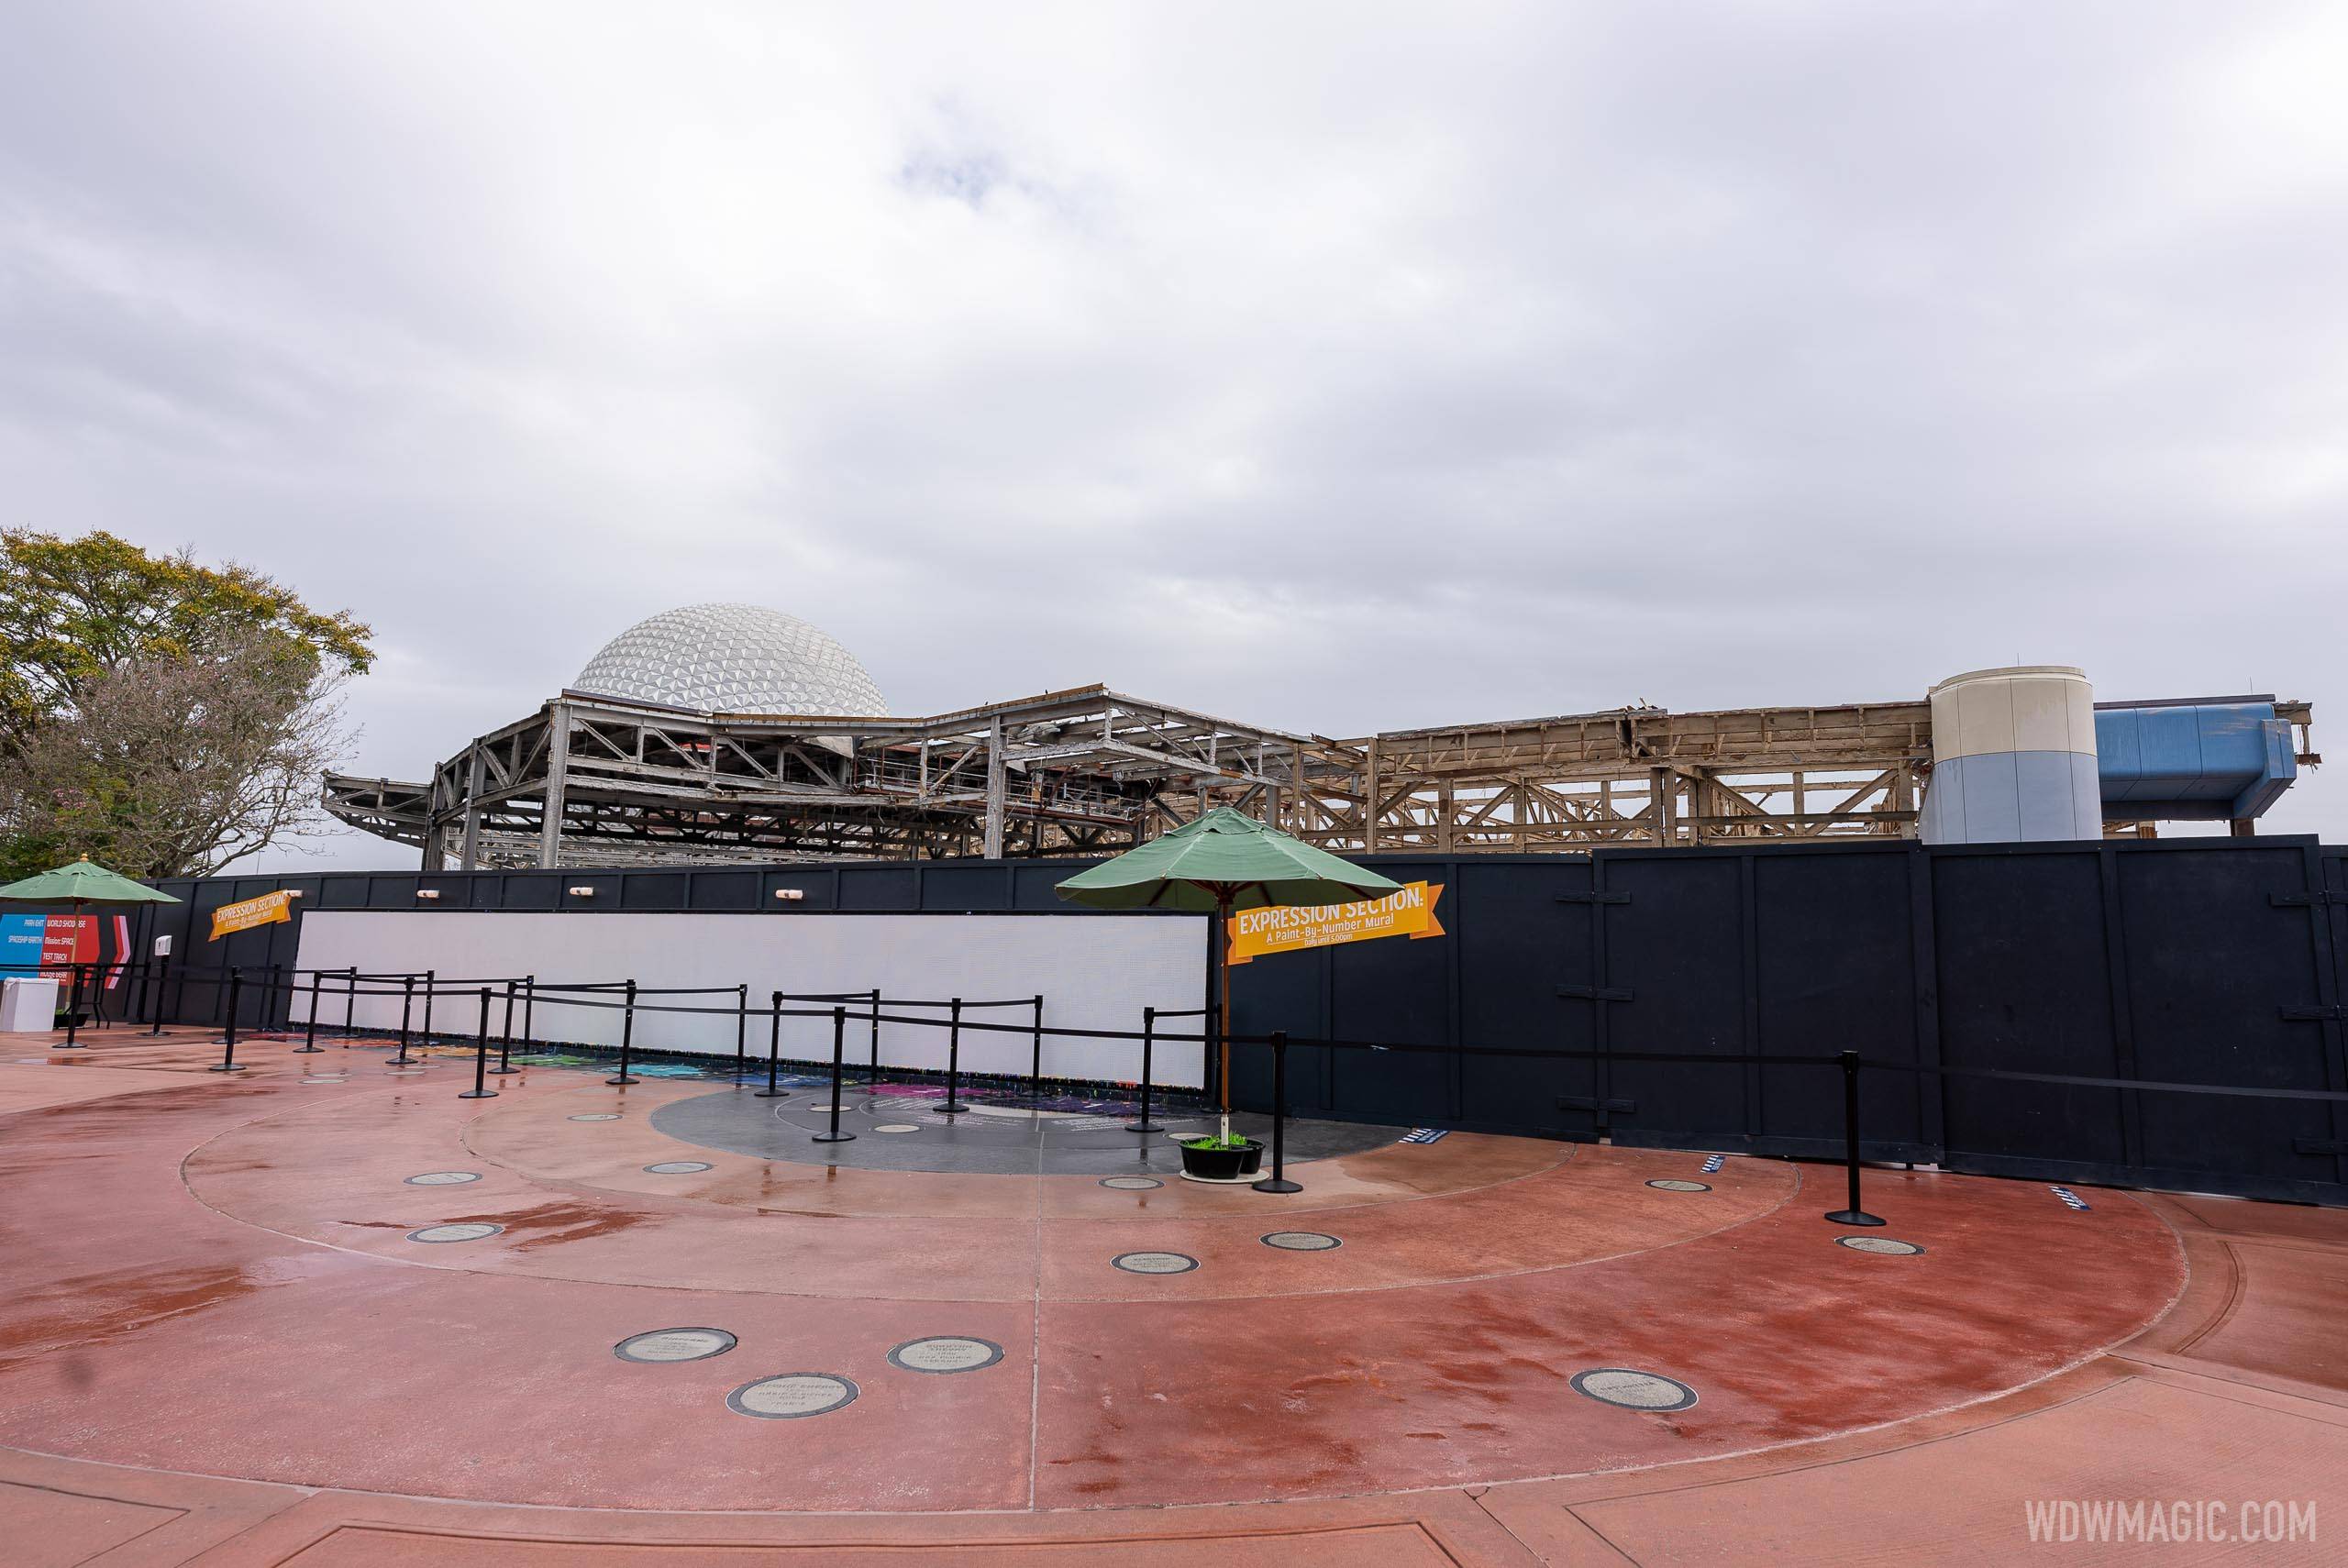 EPCOT Innoventions West demolition - February 17 2021